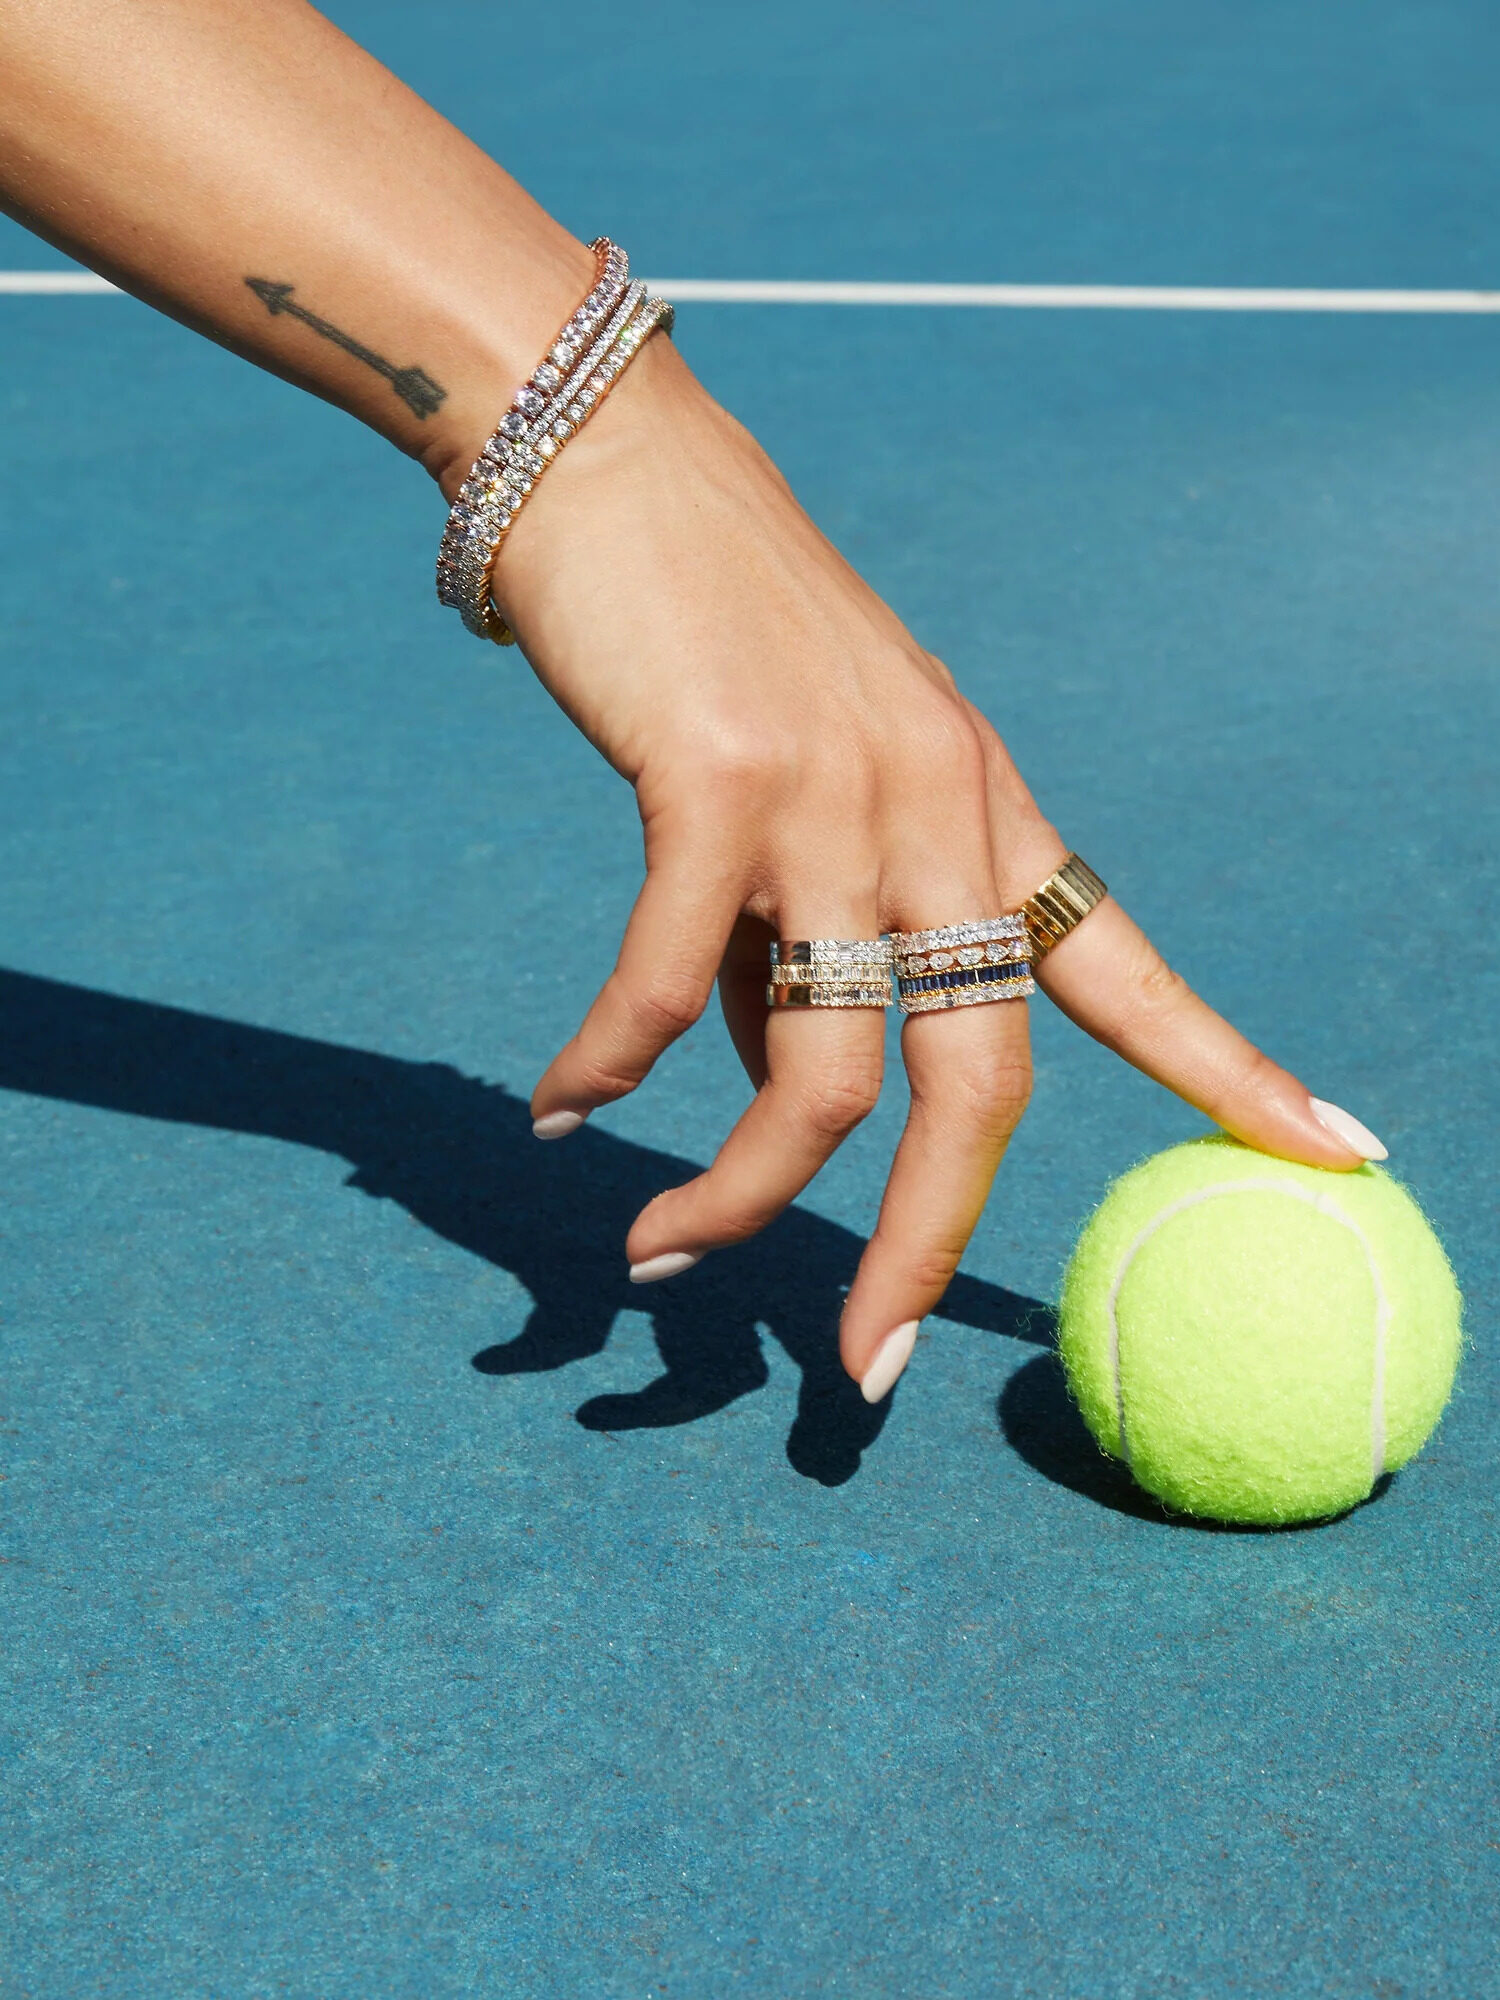 A close up shot of a hand on a tennis court touching a tennis ball with their index finger while wearing a variety of silver and gold Aurate rings and tennis bracelets.